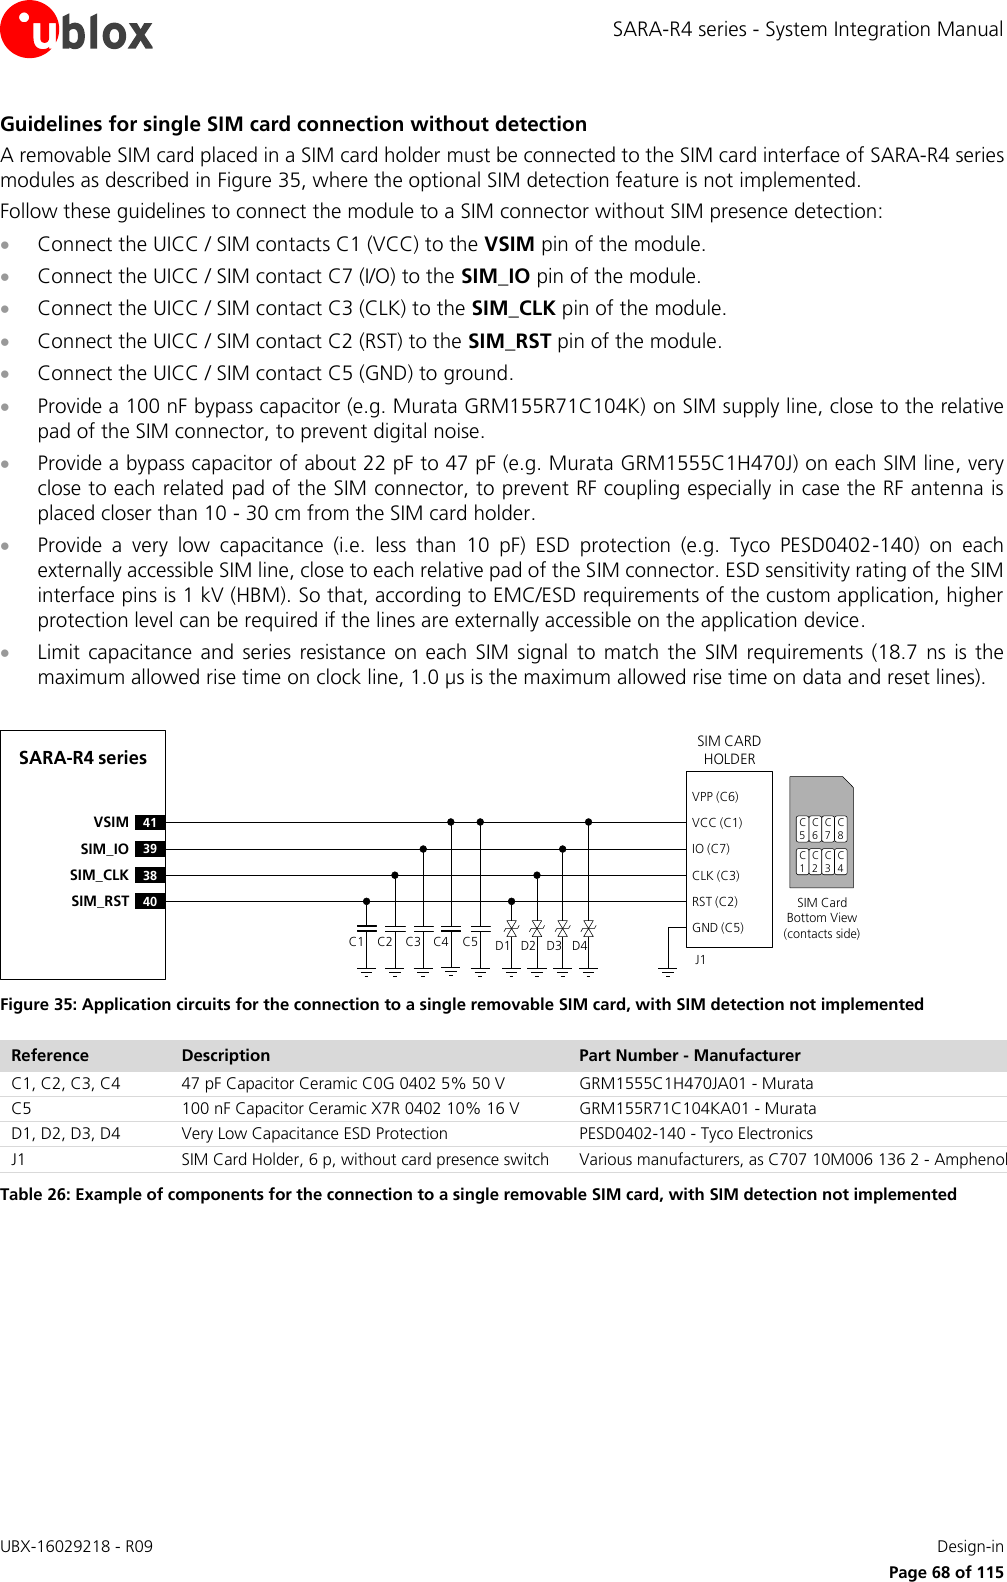 SARA-R4 series - System Integration Manual UBX-16029218 - R09    Design-in     Page 68 of 115 Guidelines for single SIM card connection without detection A removable SIM card placed in a SIM card holder must be connected to the SIM card interface of SARA-R4 series modules as described in Figure 35, where the optional SIM detection feature is not implemented. Follow these guidelines to connect the module to a SIM connector without SIM presence detection:  Connect the UICC / SIM contacts C1 (VCC) to the VSIM pin of the module.  Connect the UICC / SIM contact C7 (I/O) to the SIM_IO pin of the module.  Connect the UICC / SIM contact C3 (CLK) to the SIM_CLK pin of the module.  Connect the UICC / SIM contact C2 (RST) to the SIM_RST pin of the module.  Connect the UICC / SIM contact C5 (GND) to ground.  Provide a 100 nF bypass capacitor (e.g. Murata GRM155R71C104K) on SIM supply line, close to the relative pad of the SIM connector, to prevent digital noise.  Provide a bypass capacitor of about 22 pF to 47 pF (e.g. Murata GRM1555C1H470J) on each SIM line, very close to each related pad of the SIM connector, to prevent RF coupling especially in case the RF antenna is placed closer than 10 - 30 cm from the SIM card holder.  Provide  a  very  low  capacitance  (i.e.  less  than  10  pF)  ESD  protection  (e.g.  Tyco  PESD0402-140)  on  each externally accessible SIM line, close to each relative pad of the SIM connector. ESD sensitivity rating of the SIM interface pins is 1 kV (HBM). So that, according to EMC/ESD requirements of the custom application, higher protection level can be required if the lines are externally accessible on the application device.  Limit capacitance  and  series  resistance on each  SIM  signal  to  match  the  SIM requirements  (18.7 ns  is  the maximum allowed rise time on clock line, 1.0 µs is the maximum allowed rise time on data and reset lines).  SARA-R4 series41VSIM39SIM_IO38SIM_CLK40SIM_RSTSIM CARD HOLDERC5C6C7C1C2C3SIM Card Bottom View (contacts side)C1VPP (C6)VCC (C1)IO (C7)CLK (C3)RST (C2)GND (C5)C2 C3 C5J1C4 D1 D2 D3 D4C8C4 Figure 35: Application circuits for the connection to a single removable SIM card, with SIM detection not implemented Reference Description Part Number - Manufacturer C1, C2, C3, C4 47 pF Capacitor Ceramic C0G 0402 5% 50 V GRM1555C1H470JA01 - Murata C5 100 nF Capacitor Ceramic X7R 0402 10% 16 V GRM155R71C104KA01 - Murata D1, D2, D3, D4 Very Low Capacitance ESD Protection PESD0402-140 - Tyco Electronics  J1 SIM Card Holder, 6 p, without card presence switch Various manufacturers, as C707 10M006 136 2 - Amphenol Table 26: Example of components for the connection to a single removable SIM card, with SIM detection not implemented  